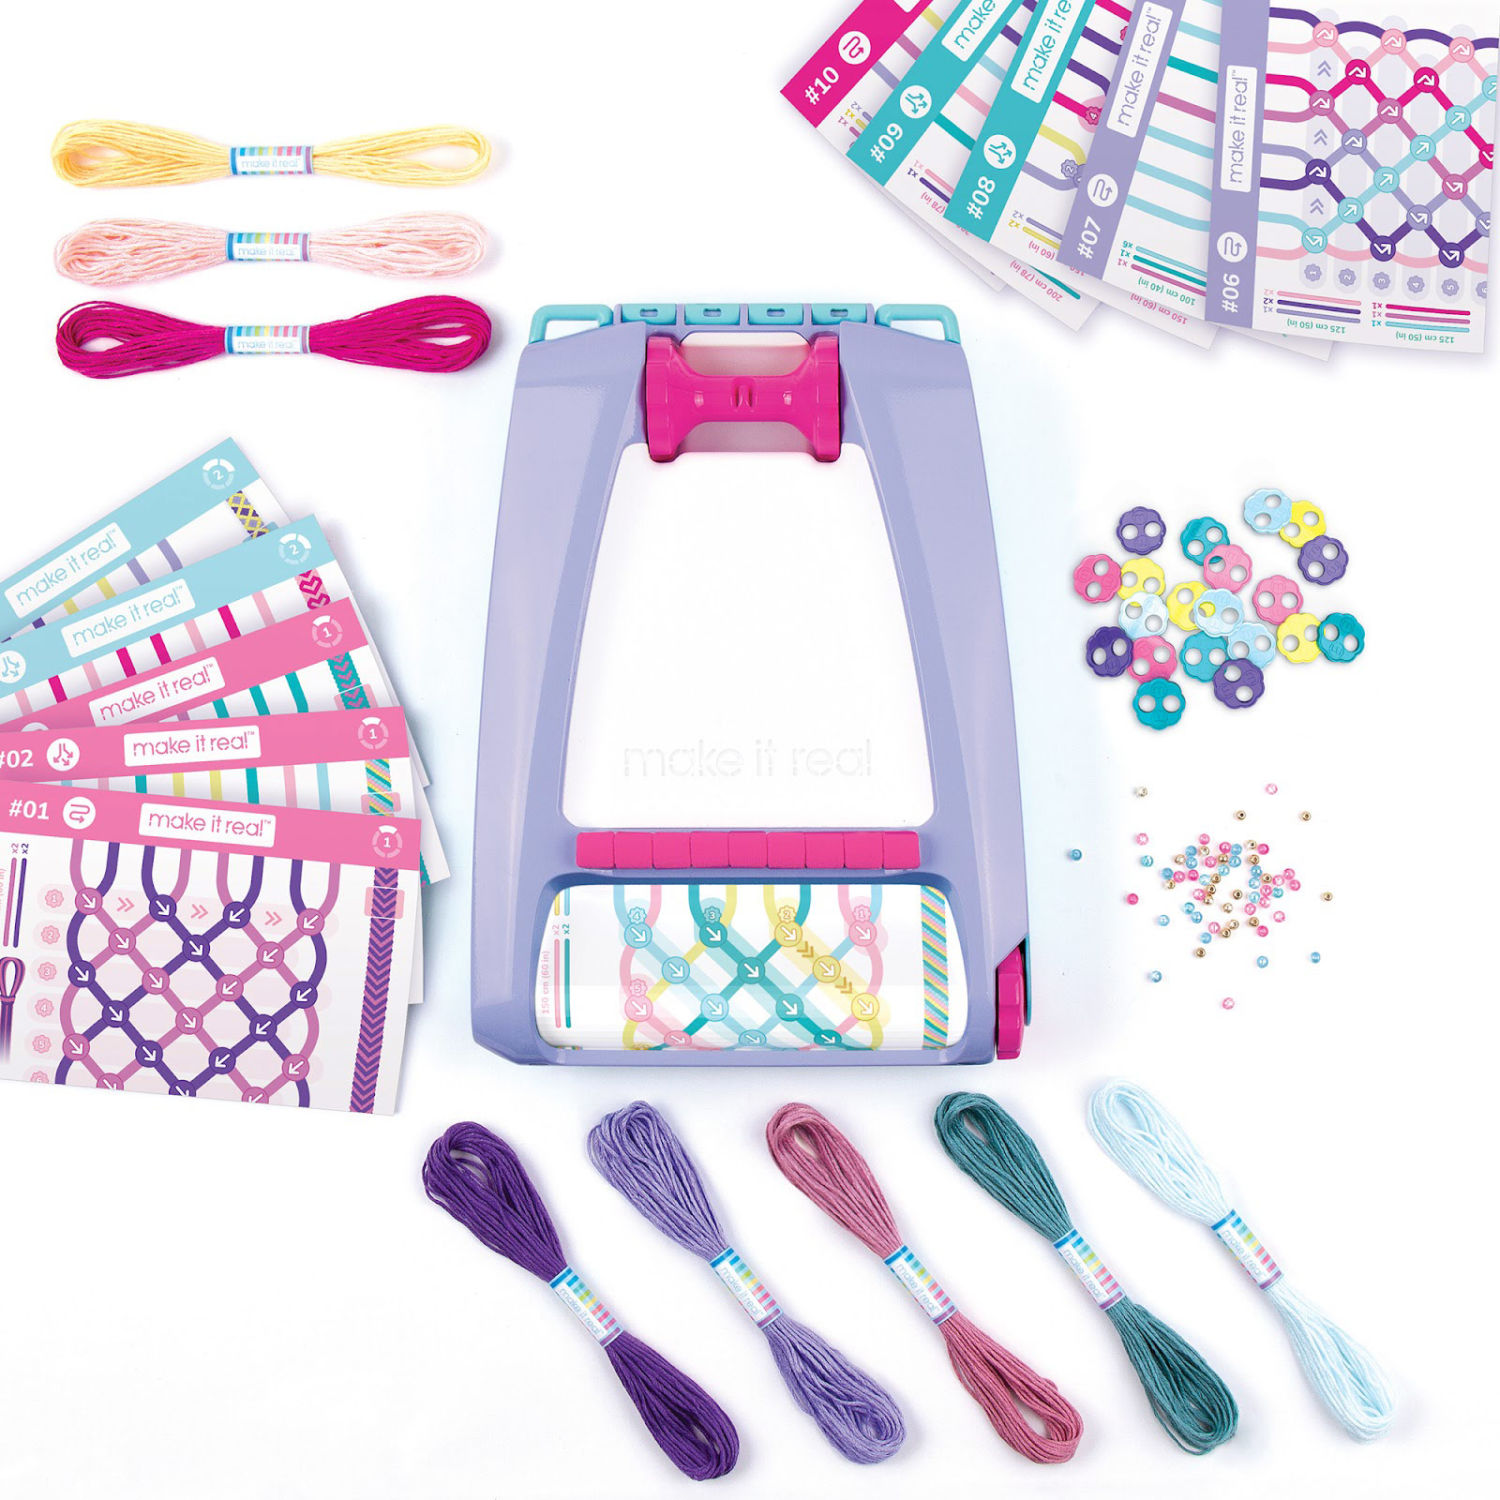 Make It Real's Friendship Bracelet Maker Easily Creates Complex Designs -  The Toy Insider